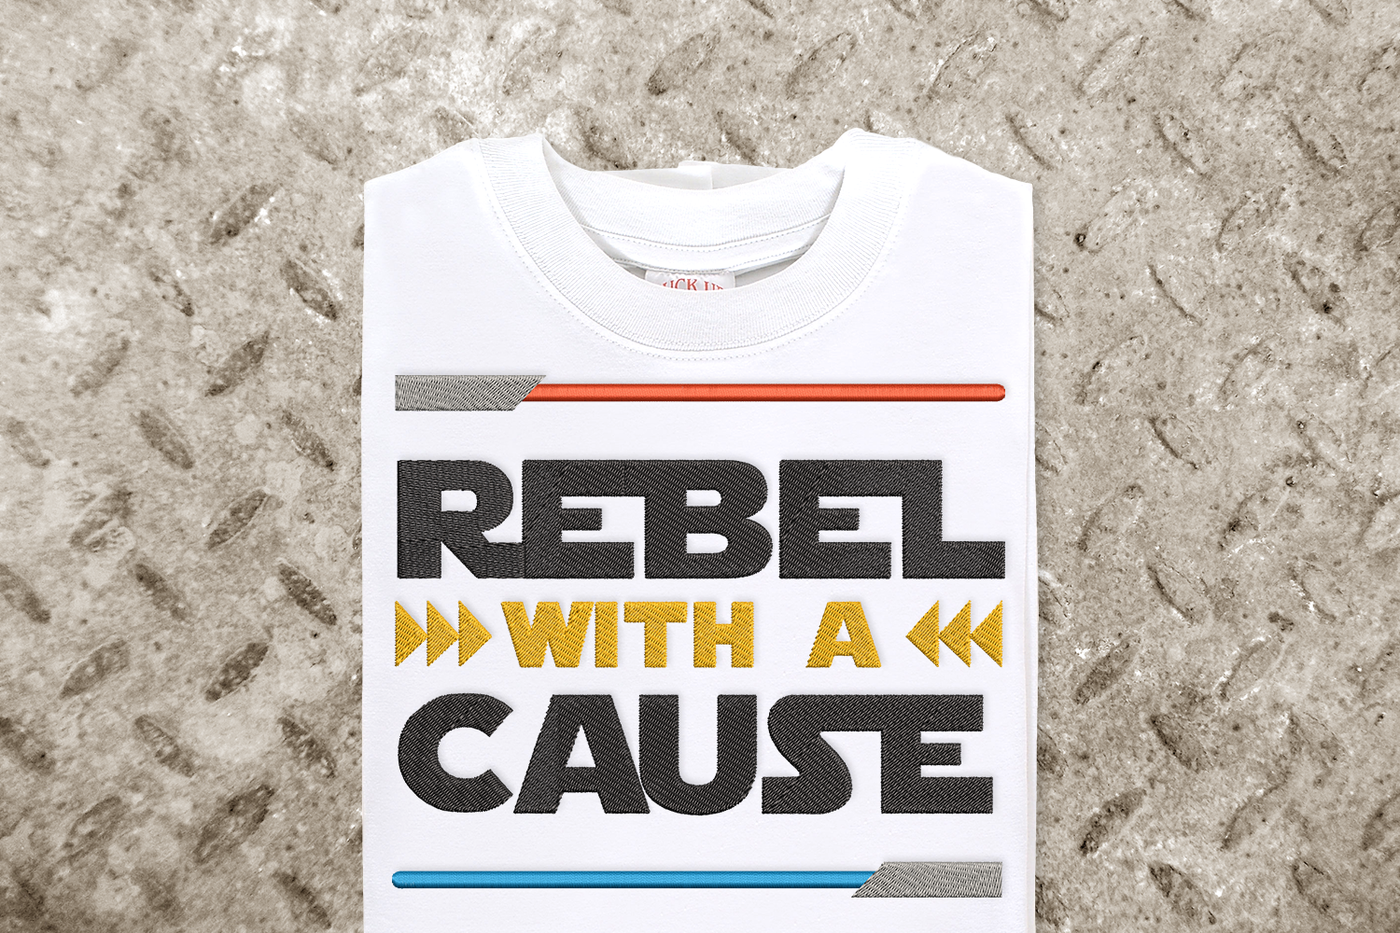 Rebel with a cause embroidery